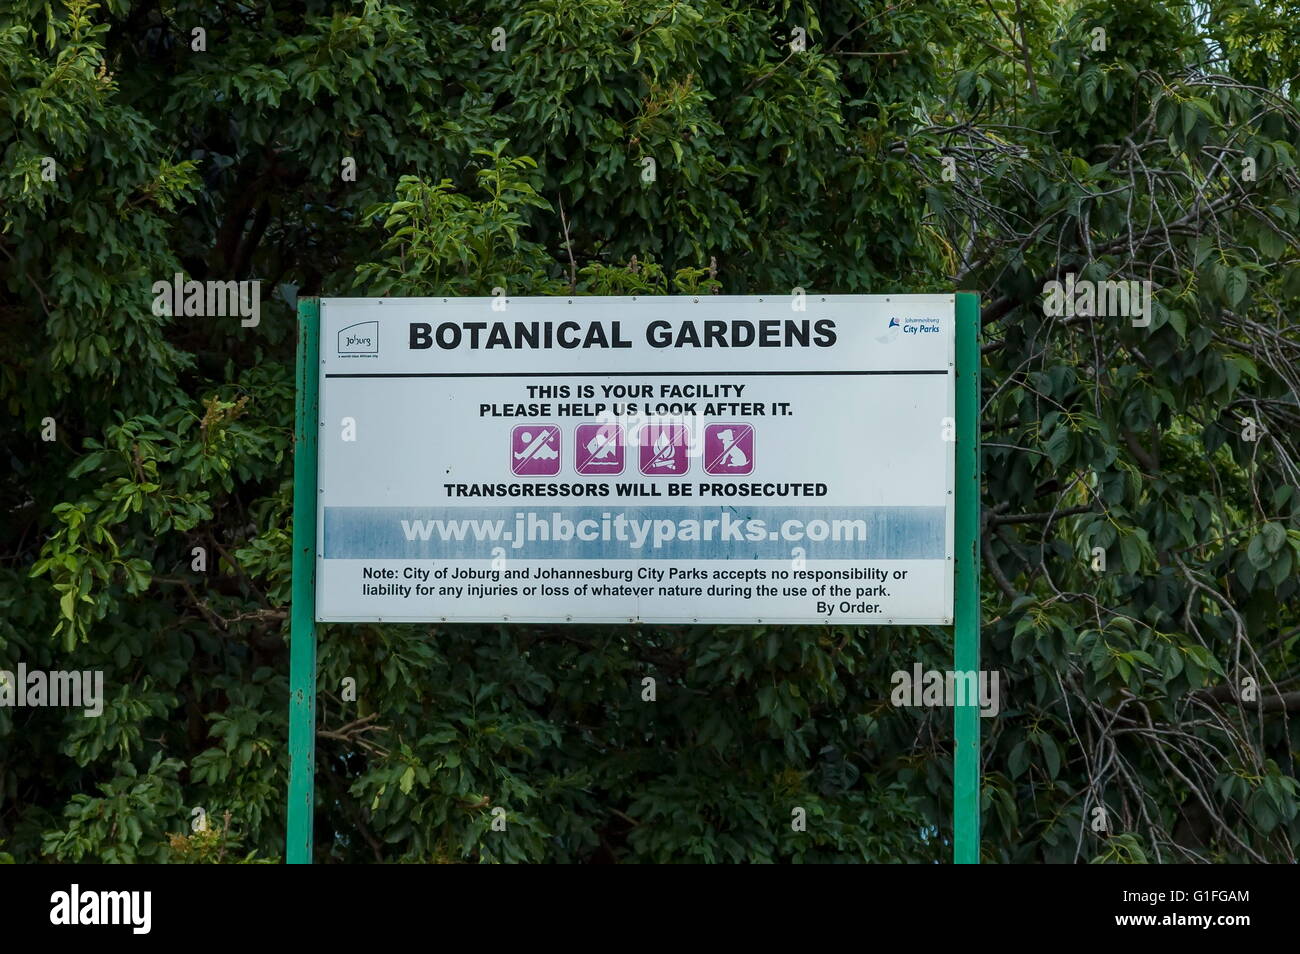 Name-plate for Botanical Garden in Johannesburg, South Africa Stock Photo